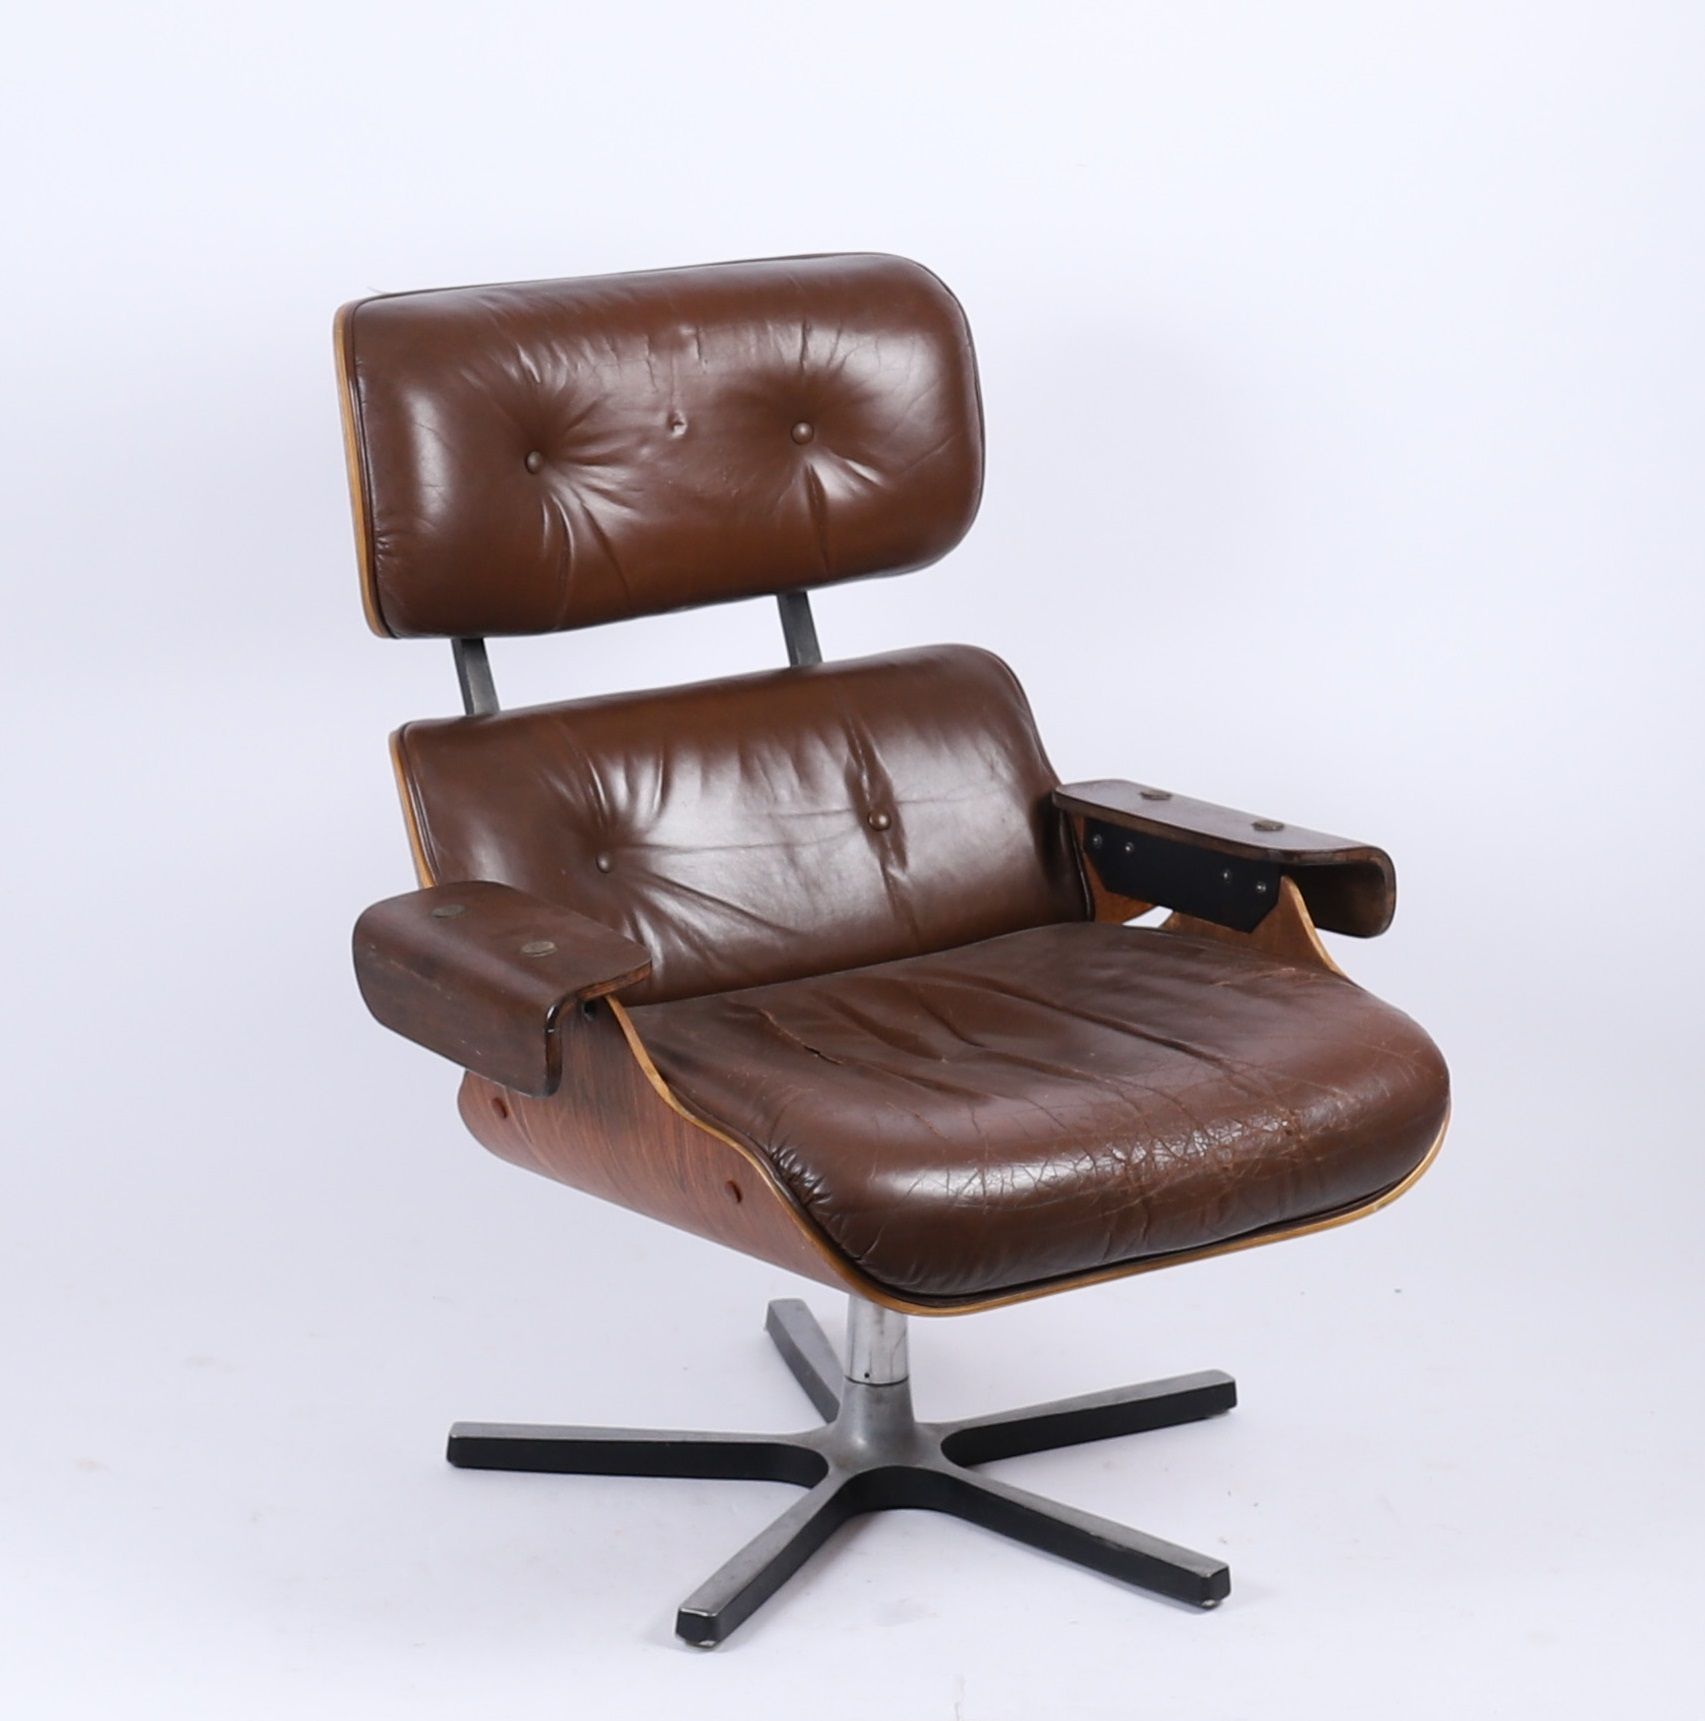 Eames SESSEL EAMES
Ruhesessel Modell "Lounge Chair 670".
Sitzschale aus thermoge&hellip;